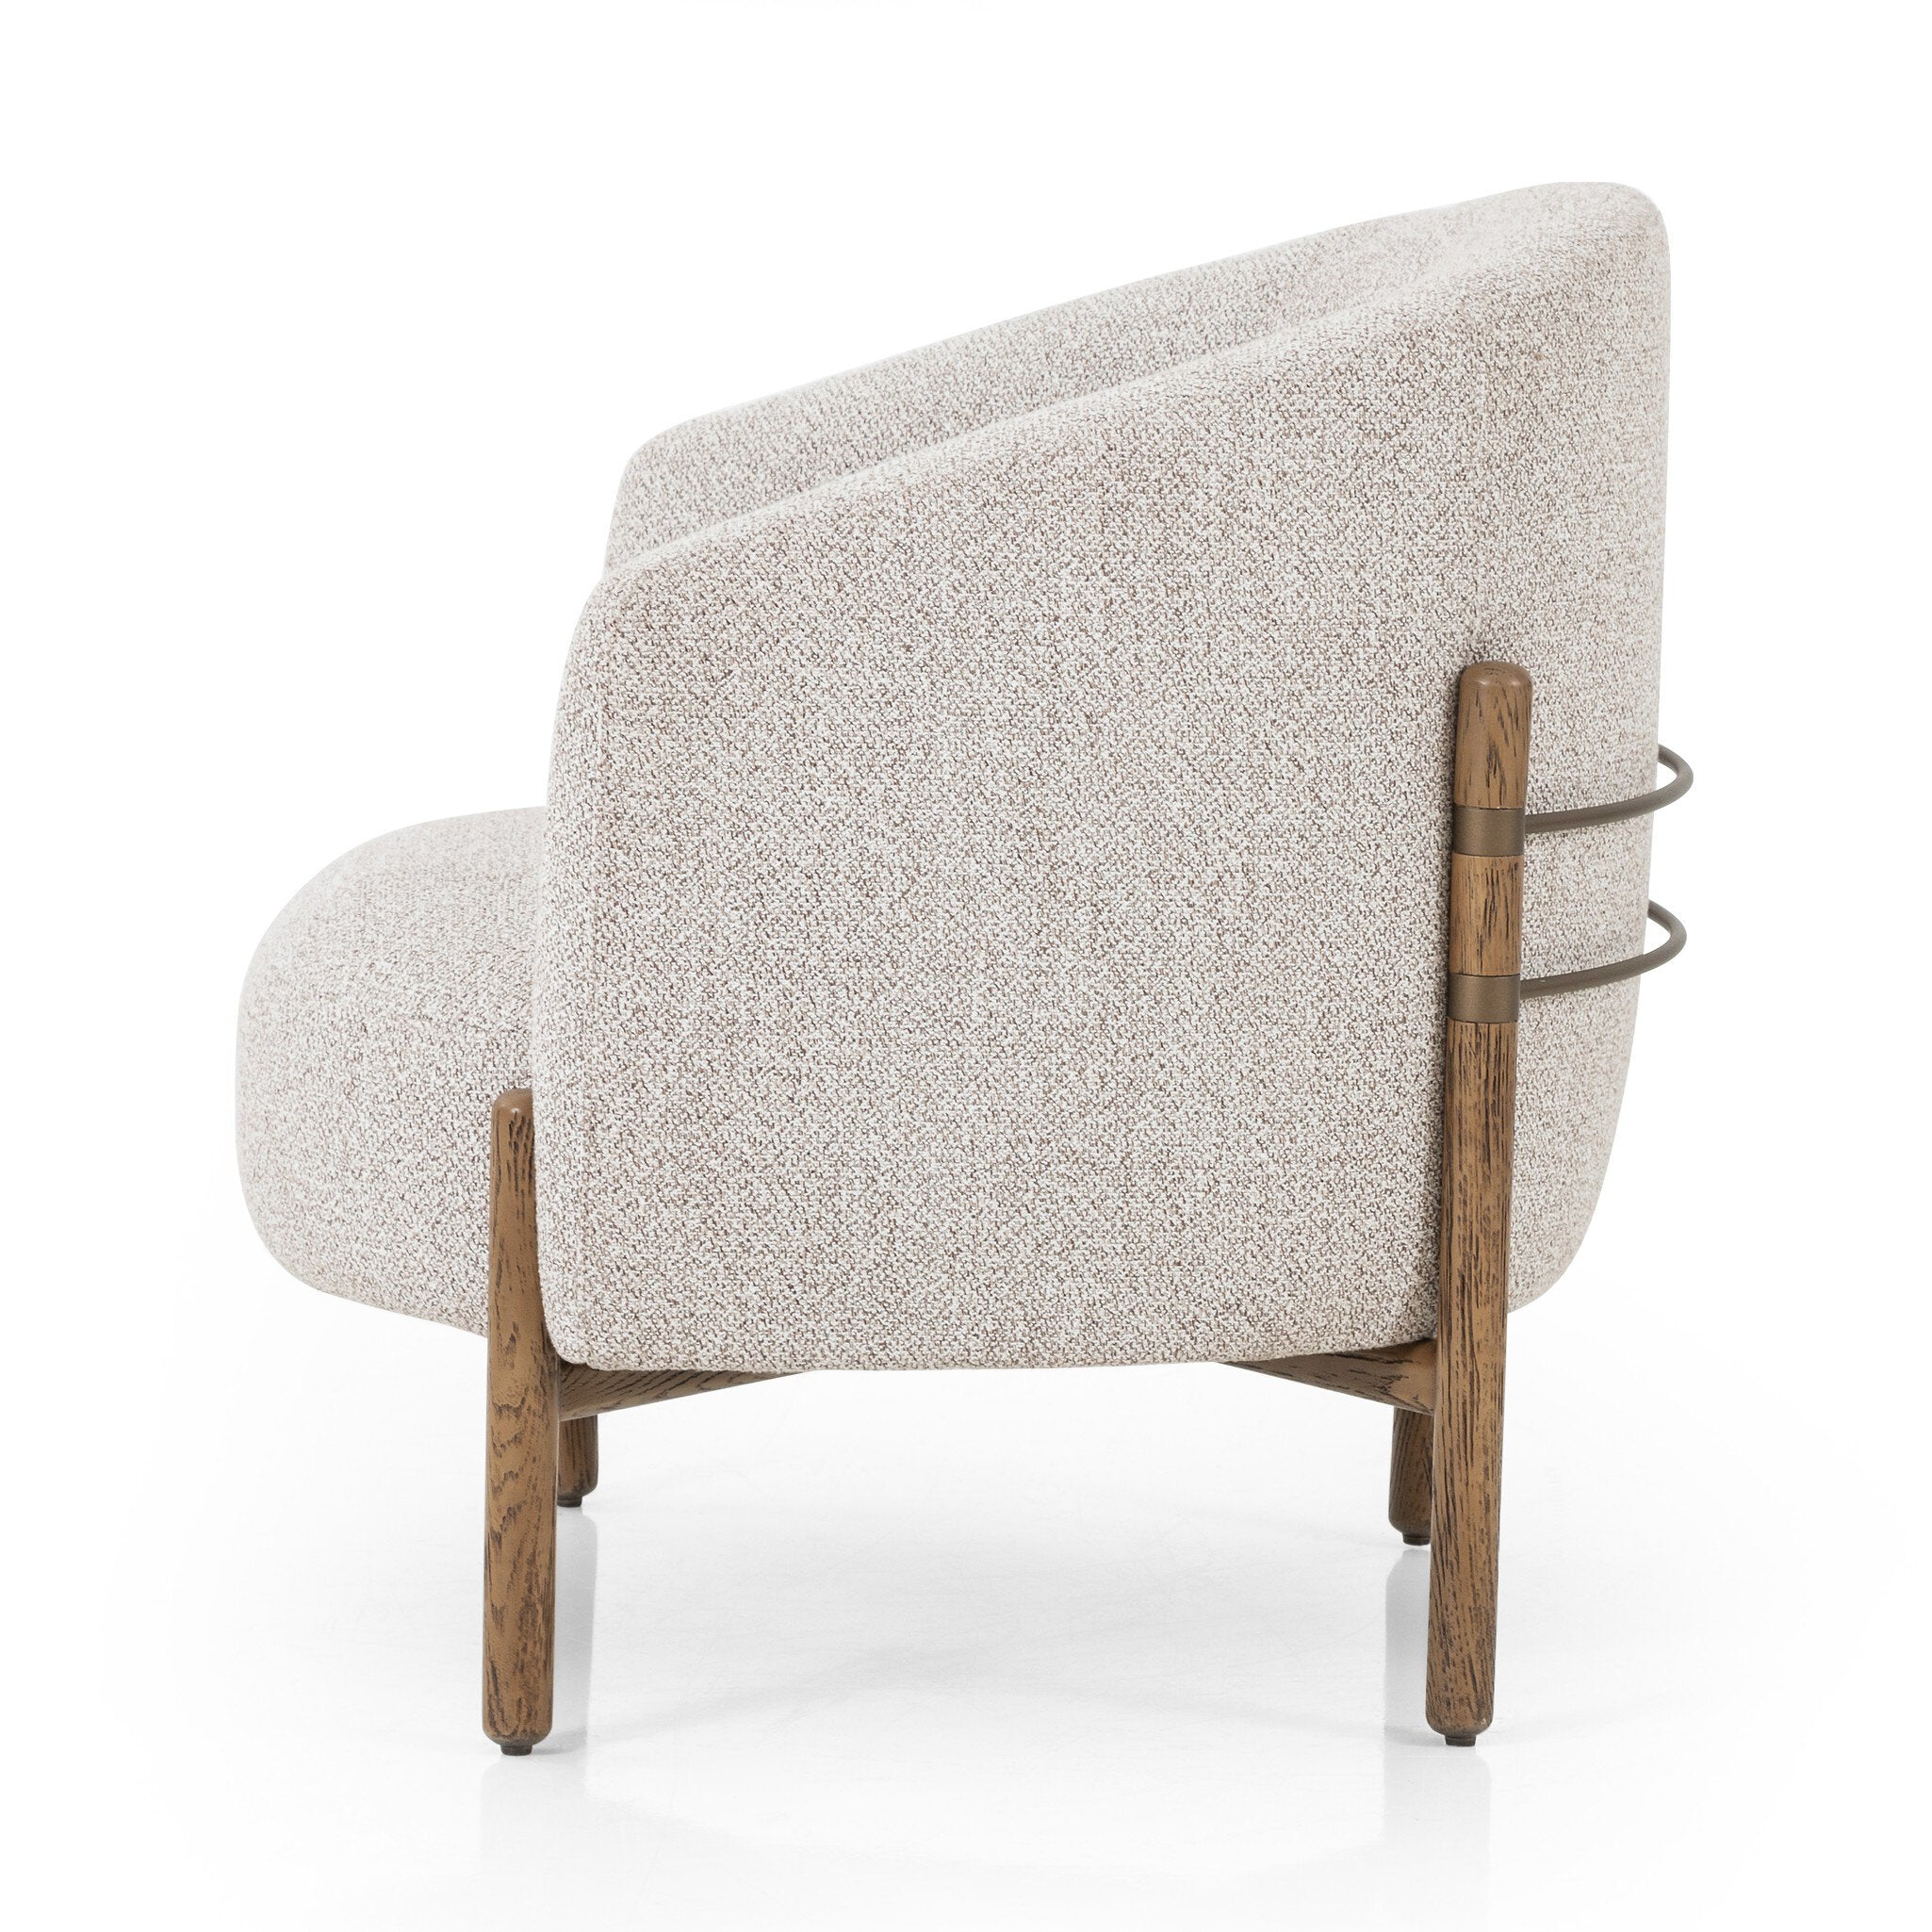 Enfield Chair - Astor Stone